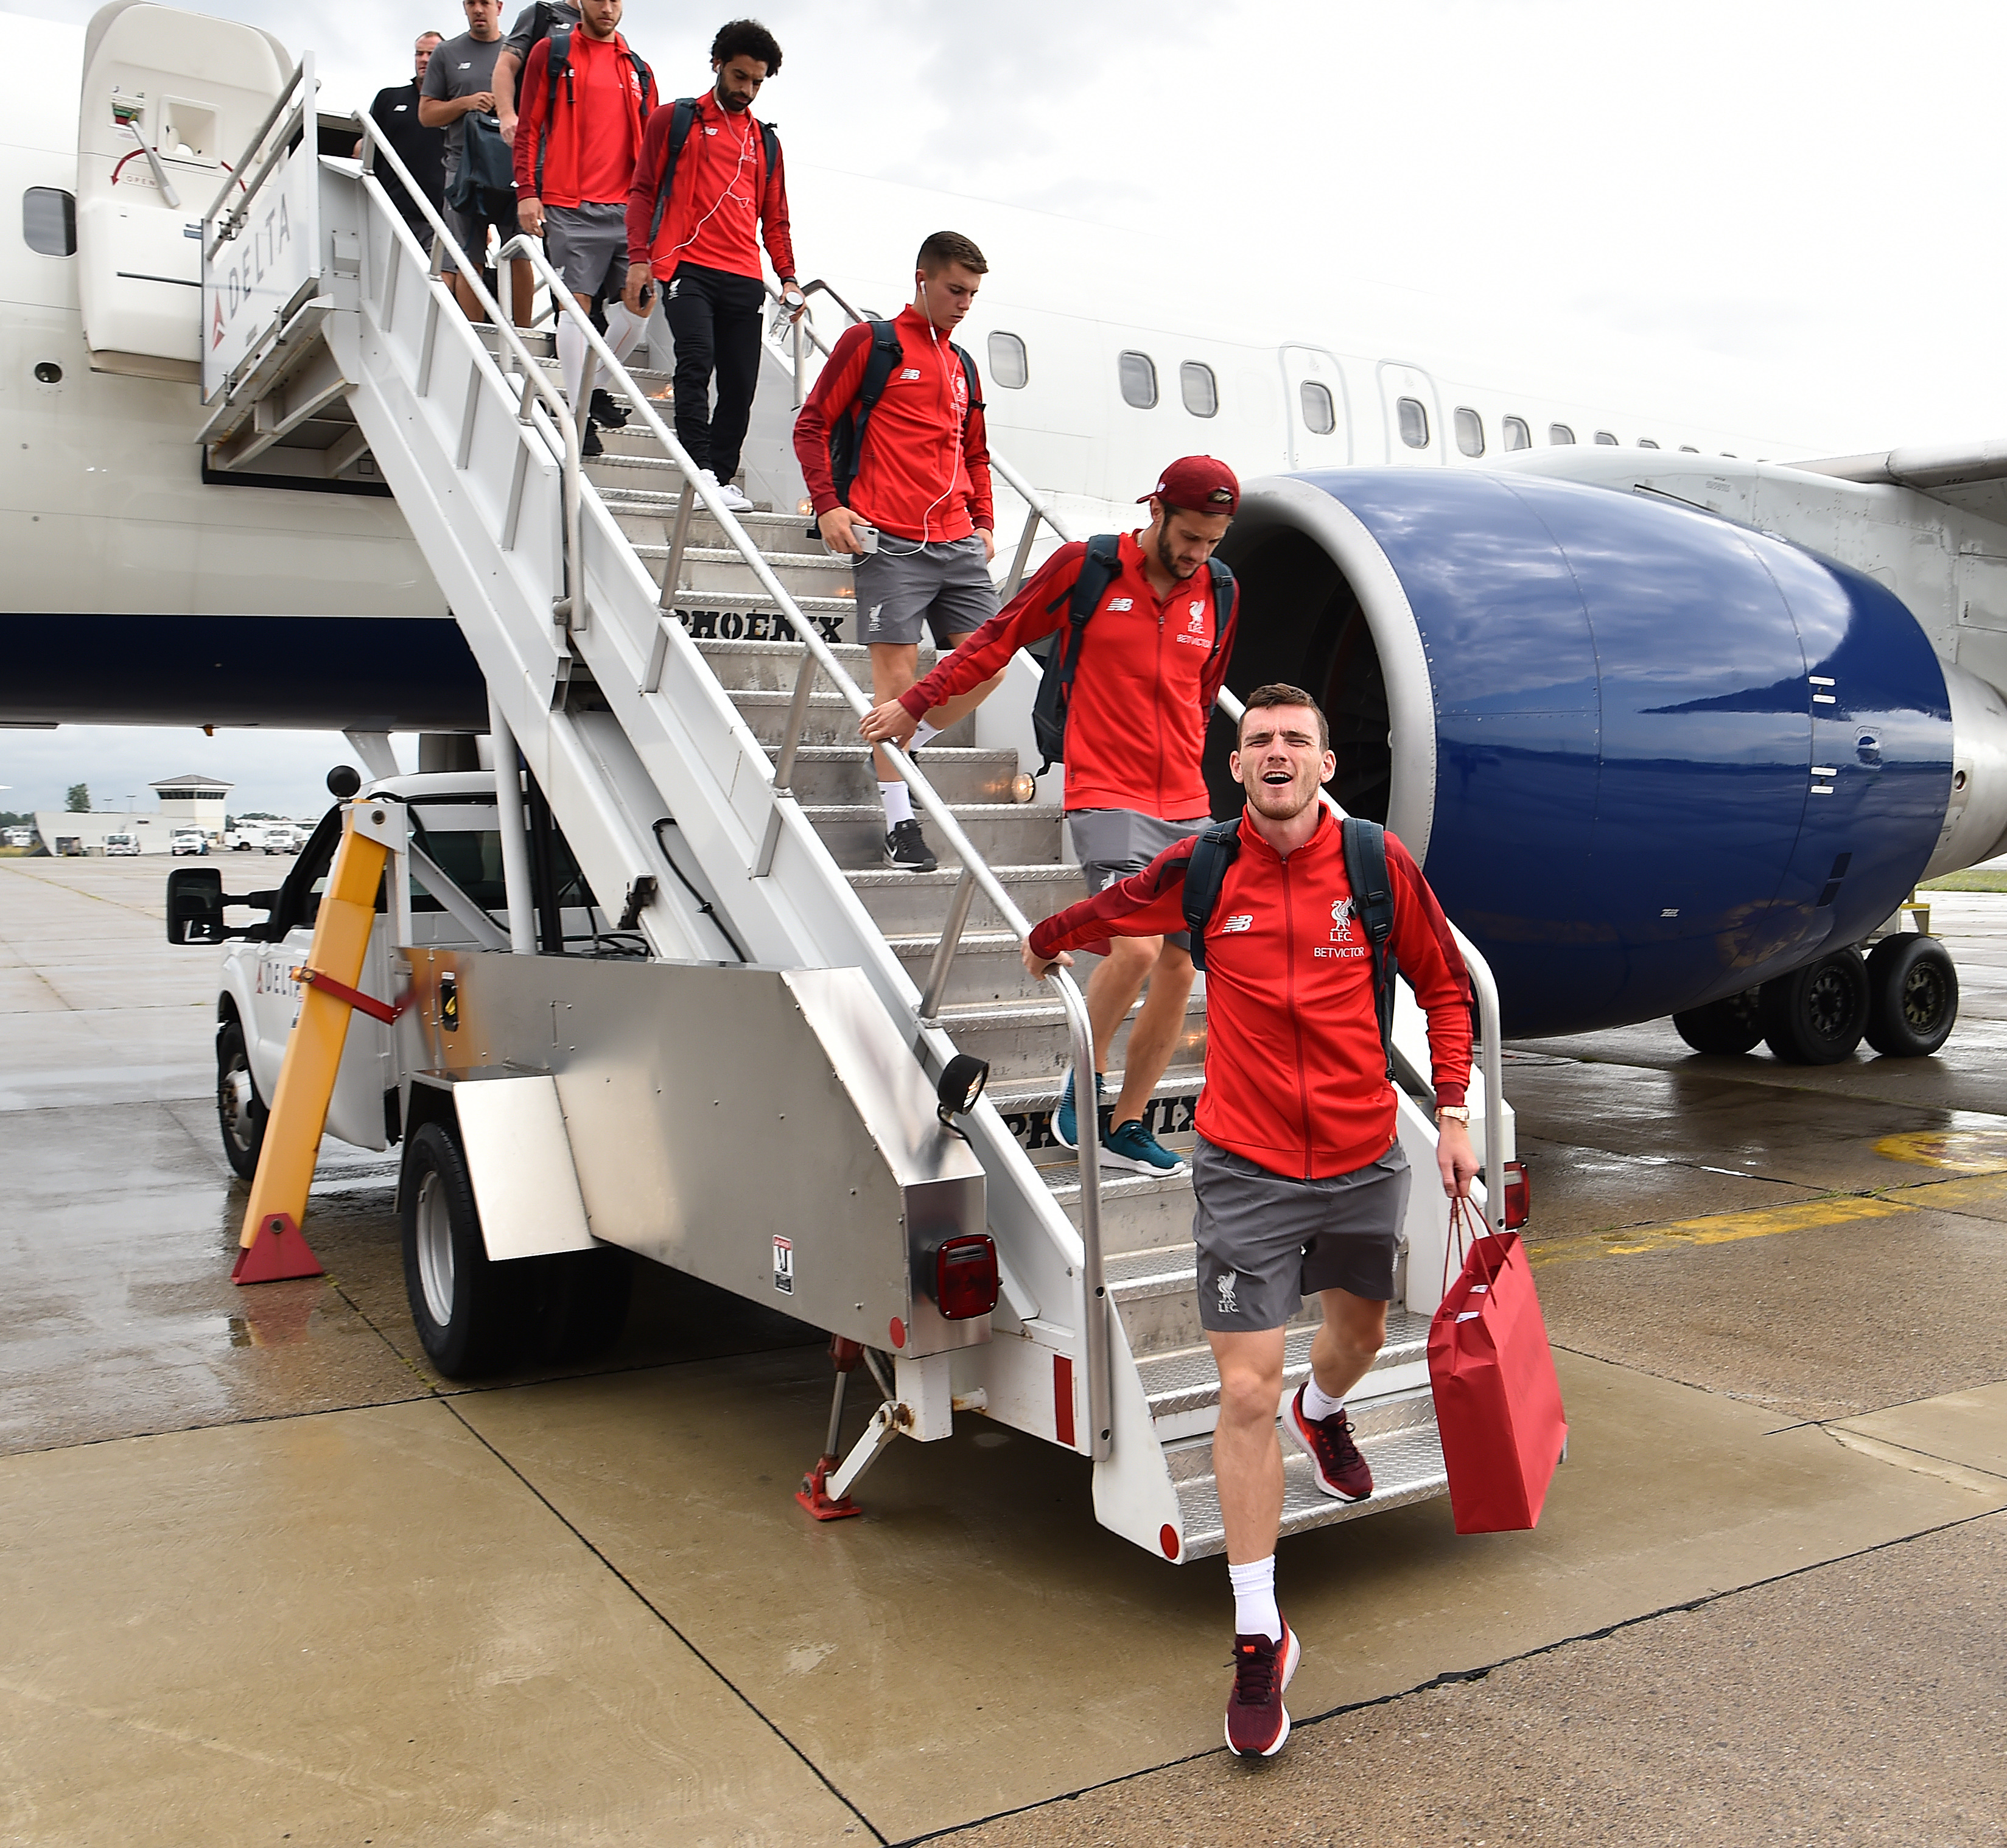 Andy Robertson of Liverpool arriving at Detroit airport for the final leg of the USA tour on July 27, 2018 in Detroit, Michigan.